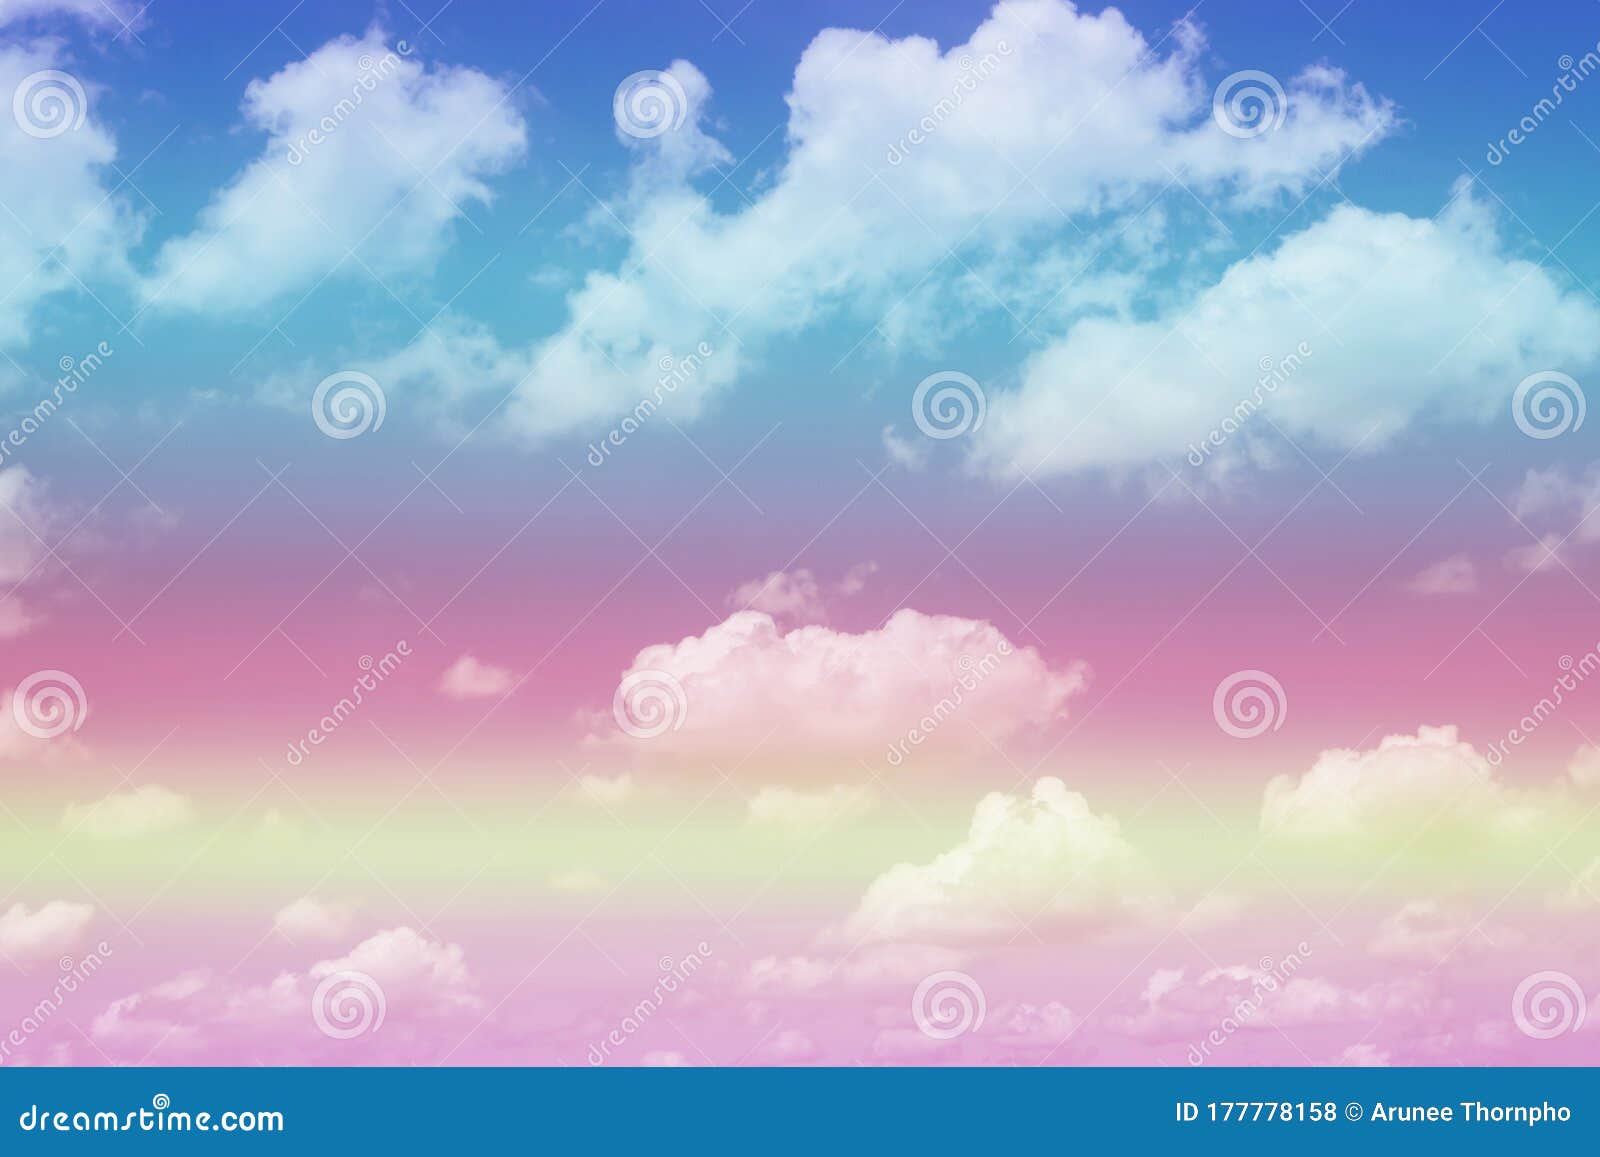 Beautiful Pastel Color with Rainbow Shade on White Fluffy Clouds, Colorful  Blue Sky on Background, Upward View and Copy Space Stock Photo - Image of  background, bright: 177778158